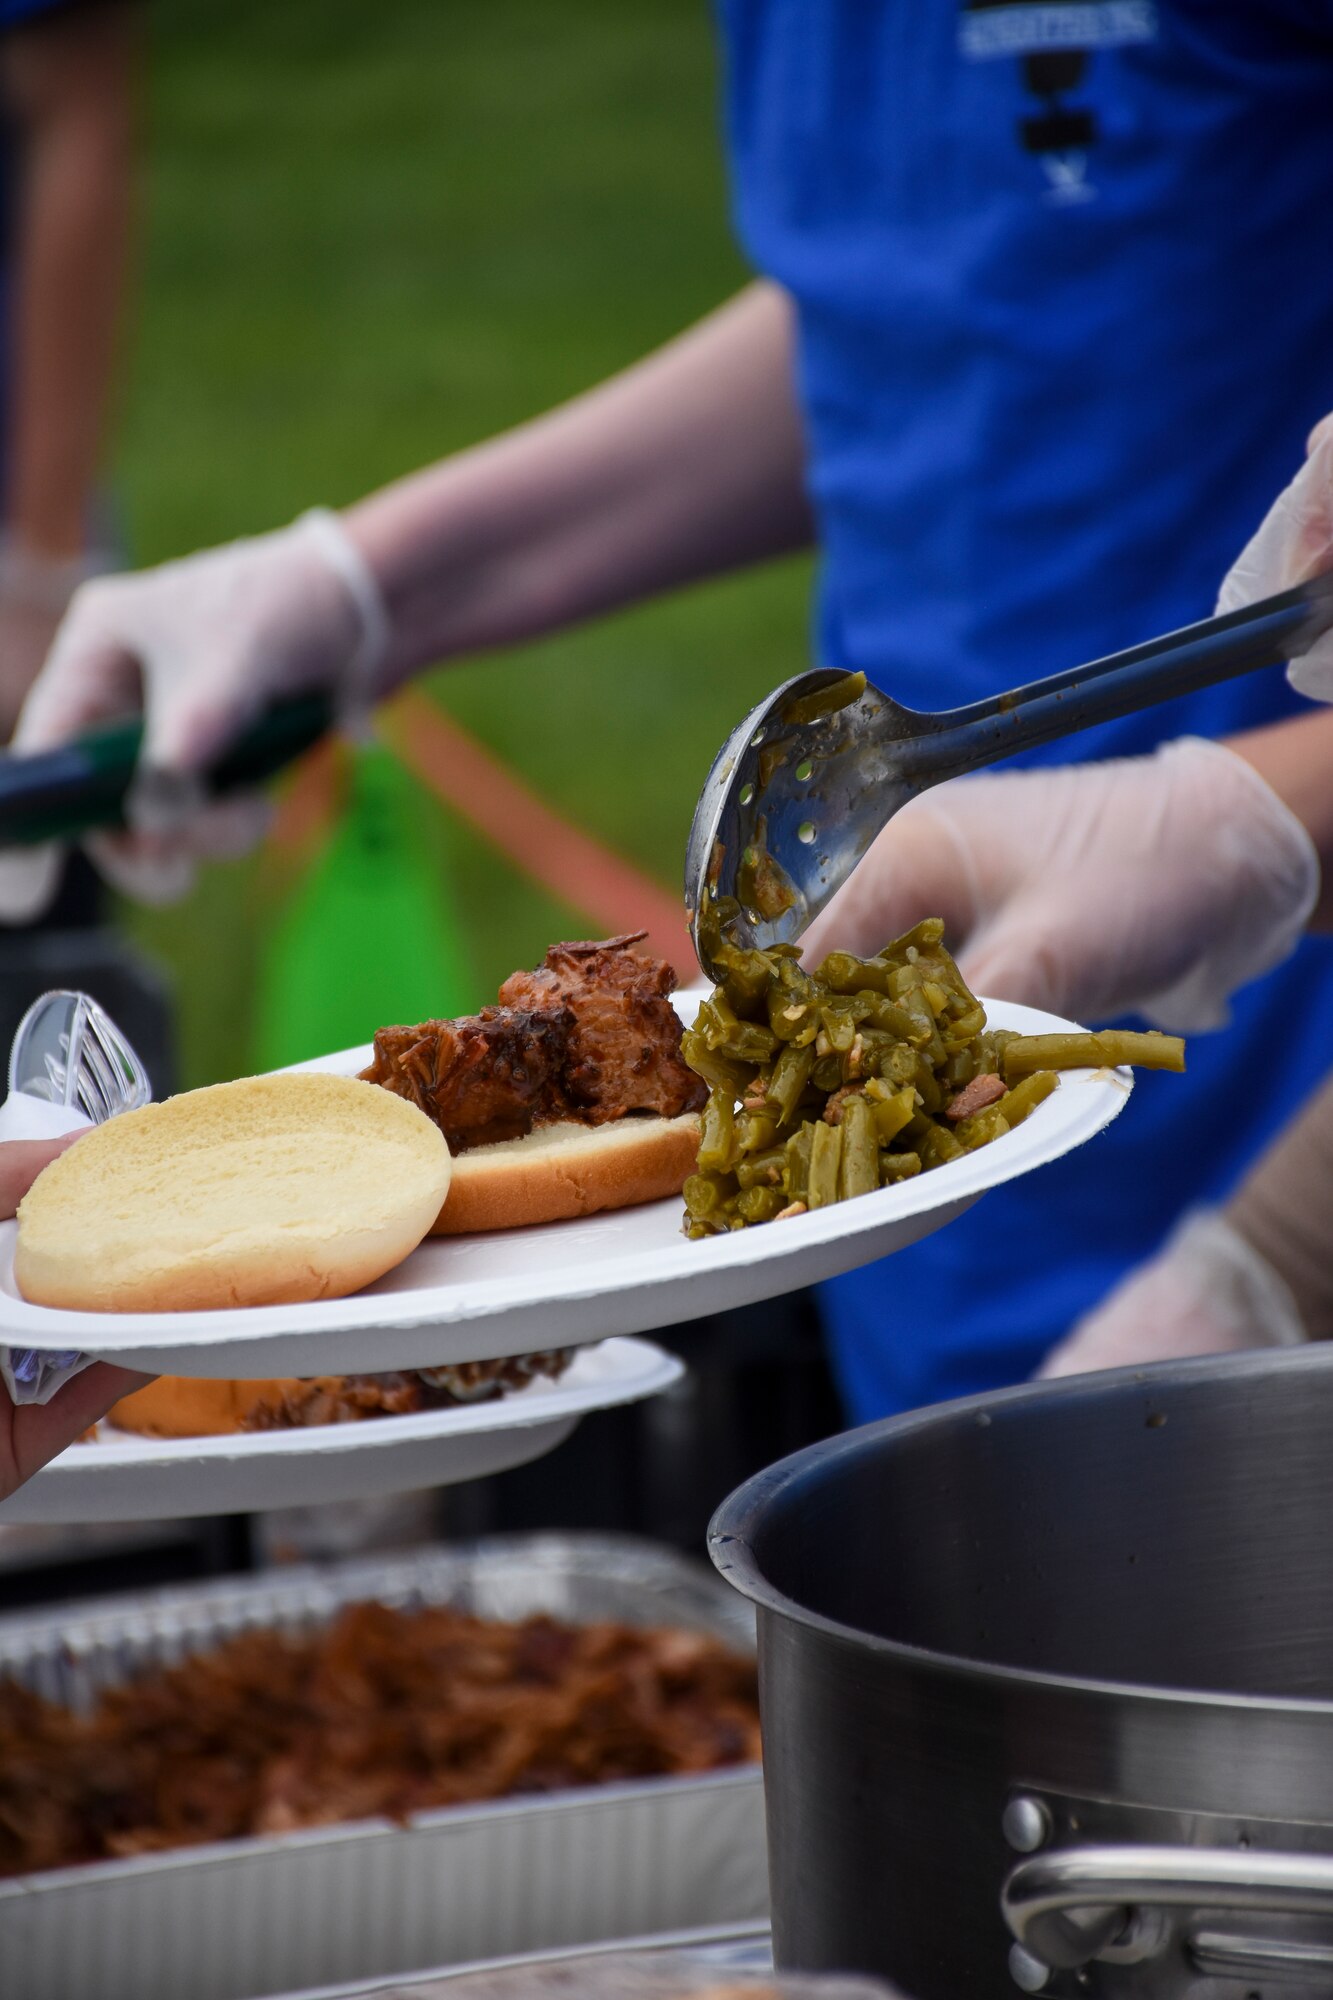 Junior ROTC cadets serve barbecue beef and pork with green beans during the 442d Fighter Wing Family Day event Sept. 9, 2018, at Ike Skelton Park on Whiteman Air Force Base, Mo.